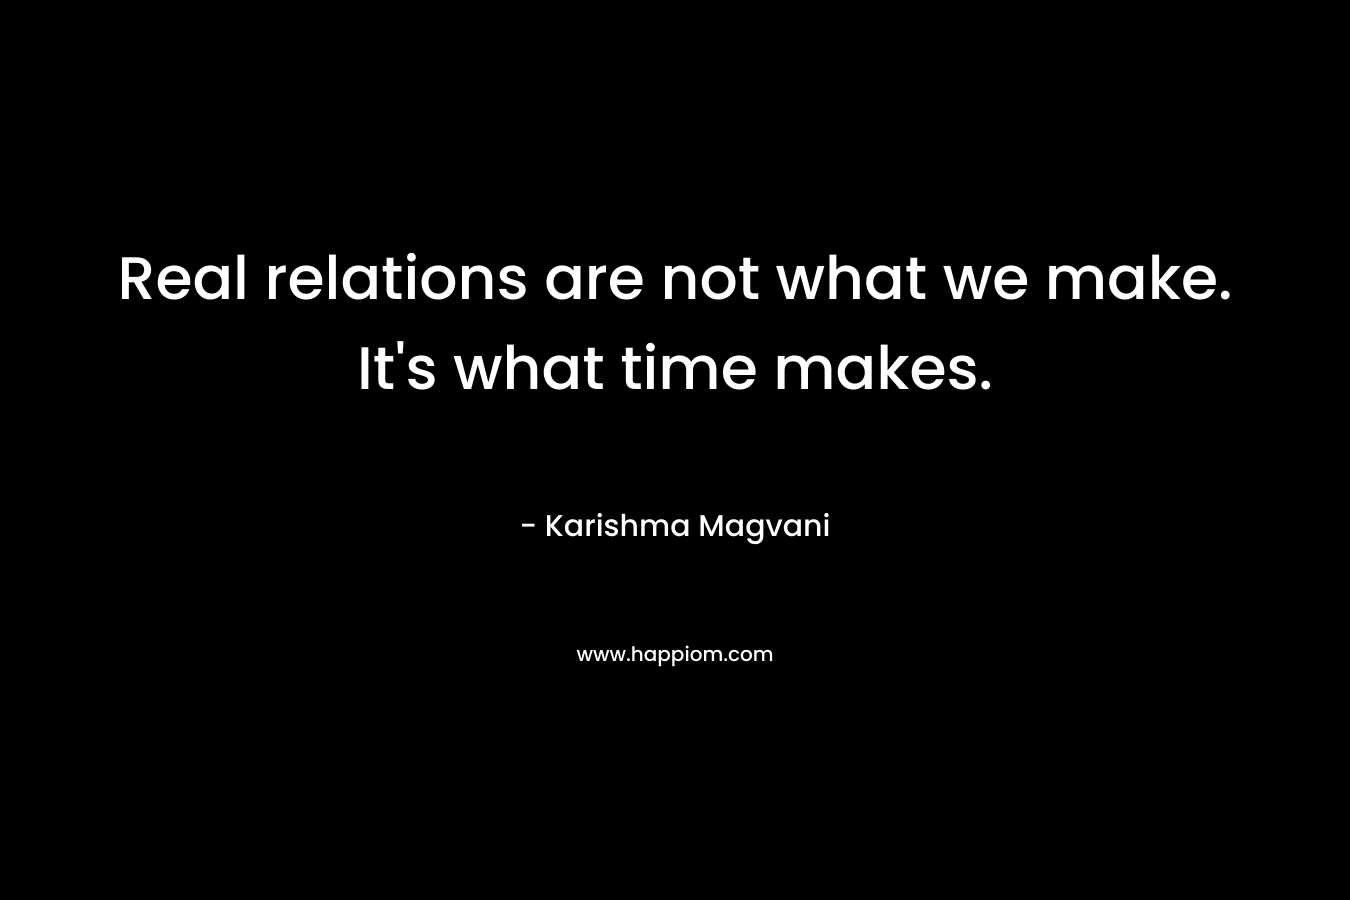 Real relations are not what we make. It’s what time makes. – Karishma Magvani